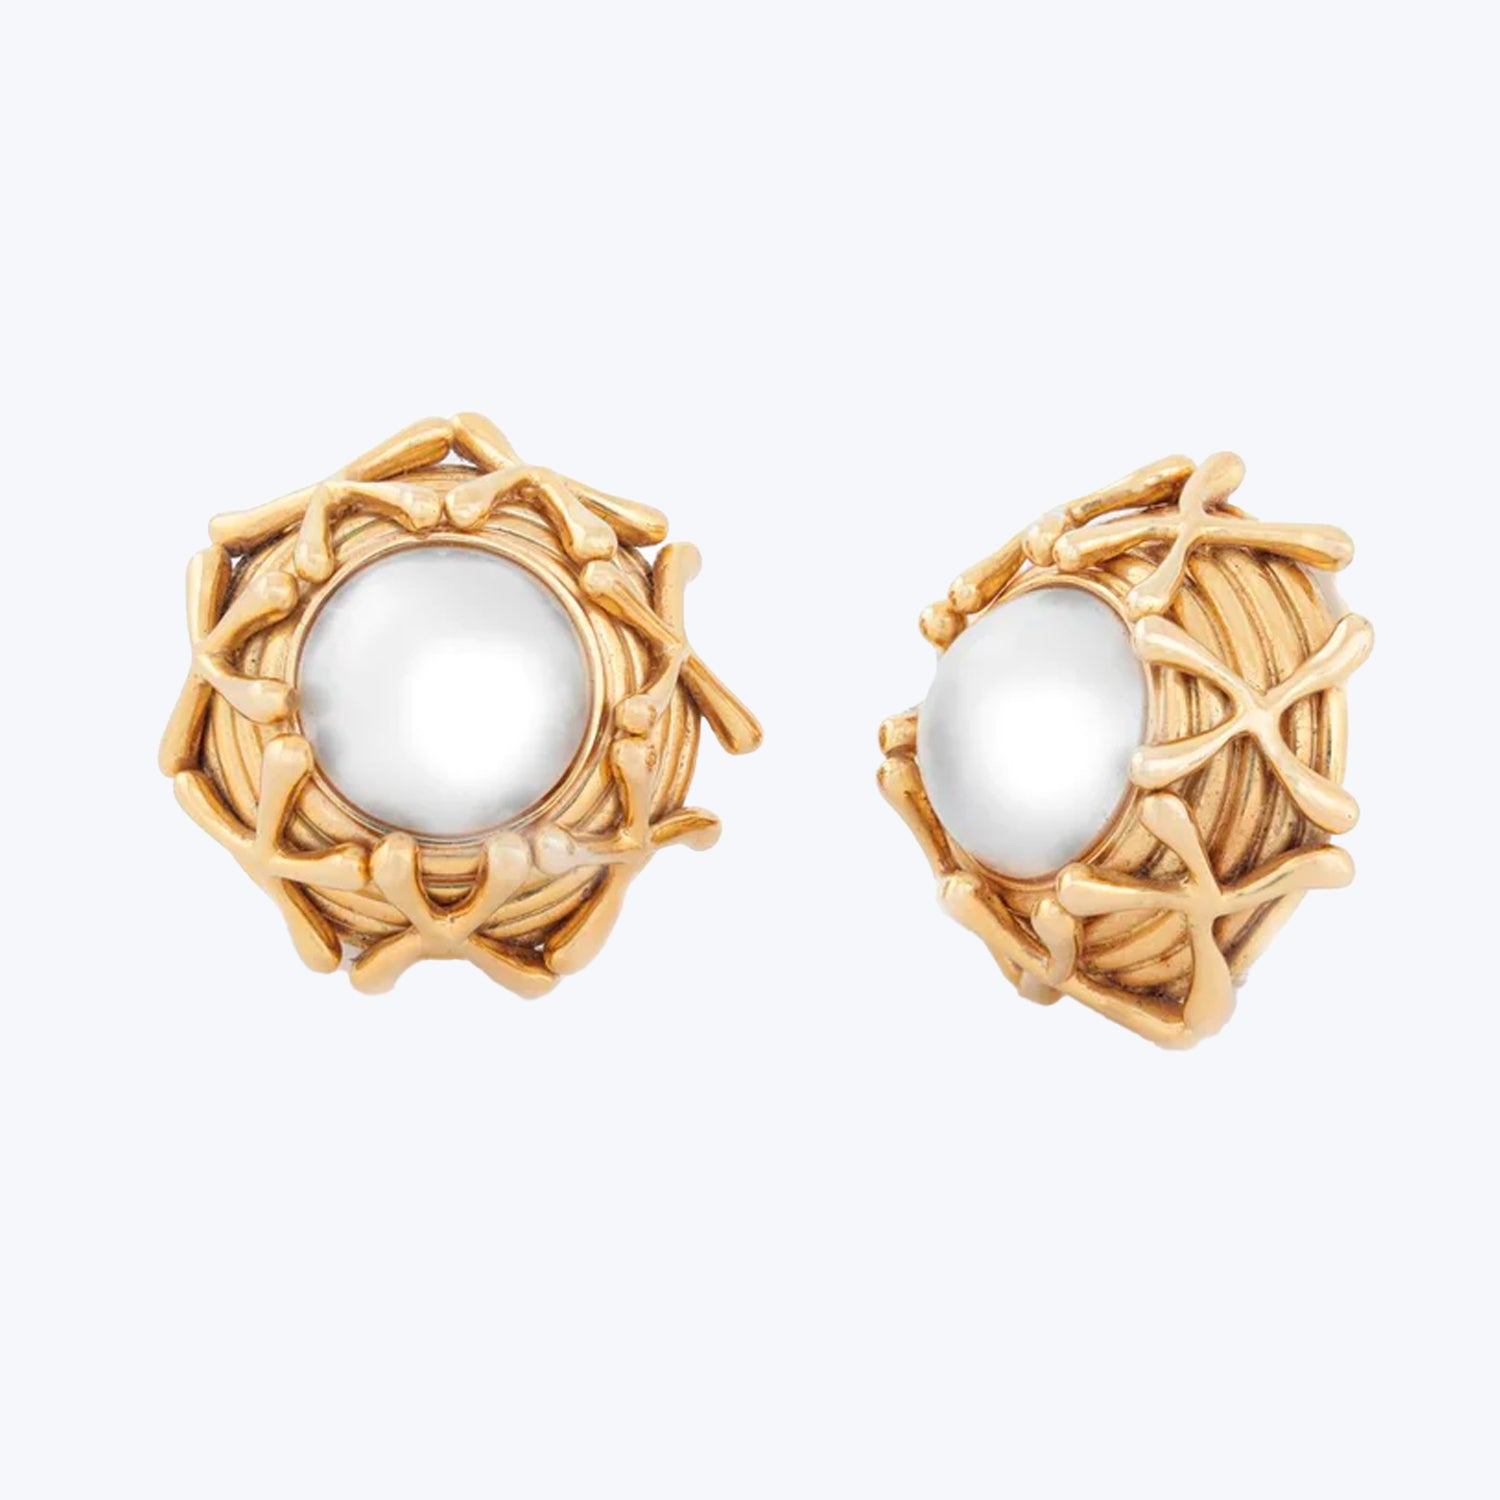 Luxurious gold-toned earrings with white pearl in intricate, organic design.